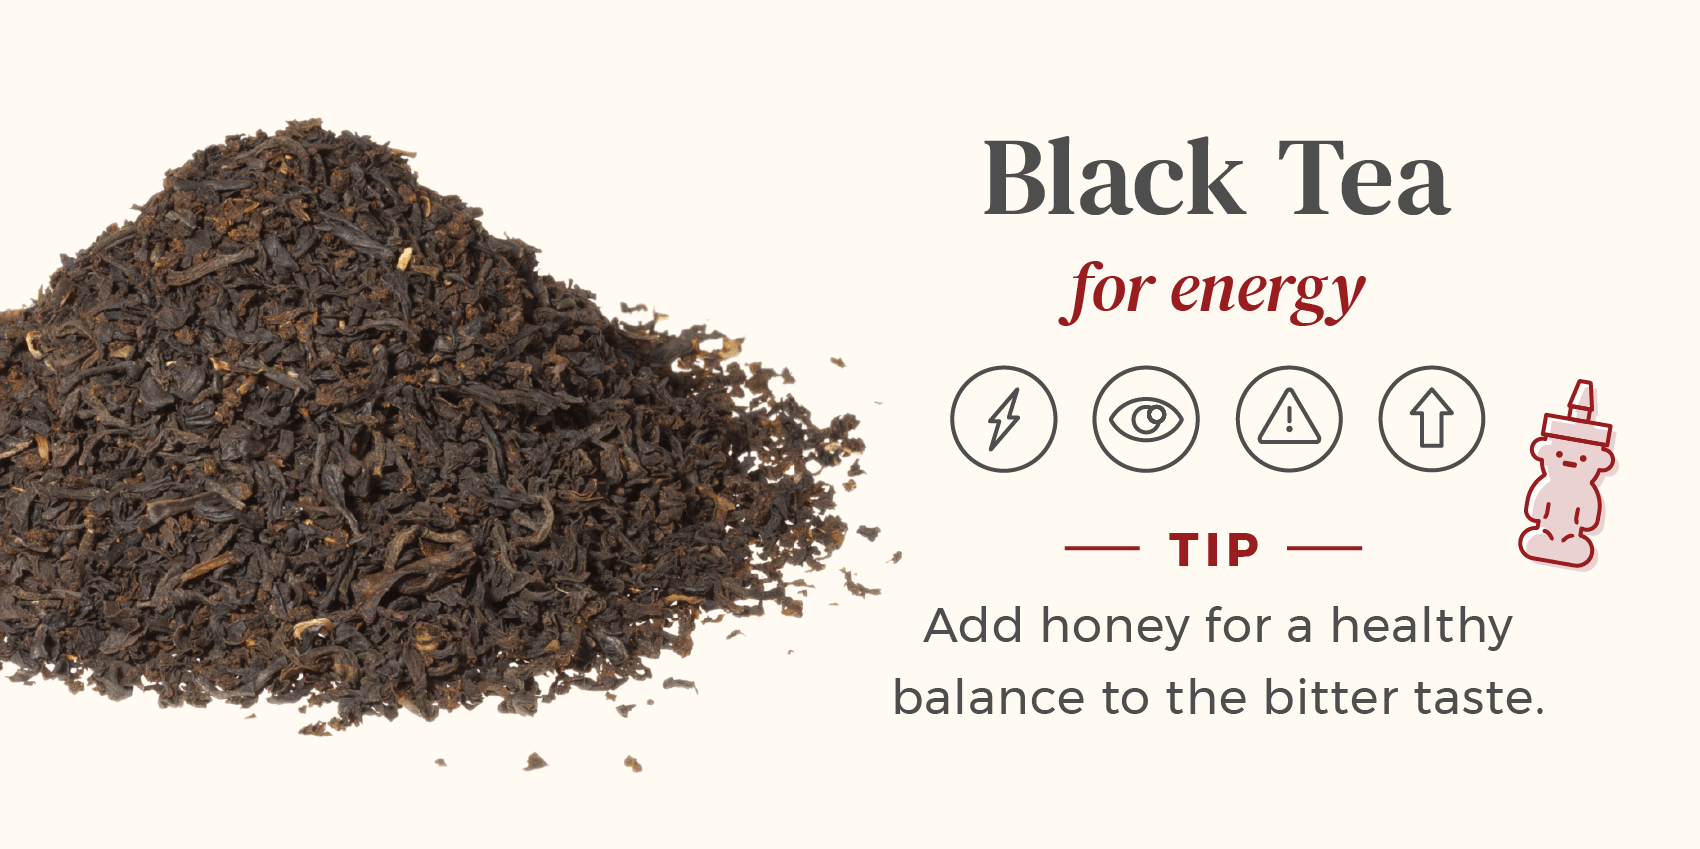 Pile of loose black tea used for energy, add honey for best effects.